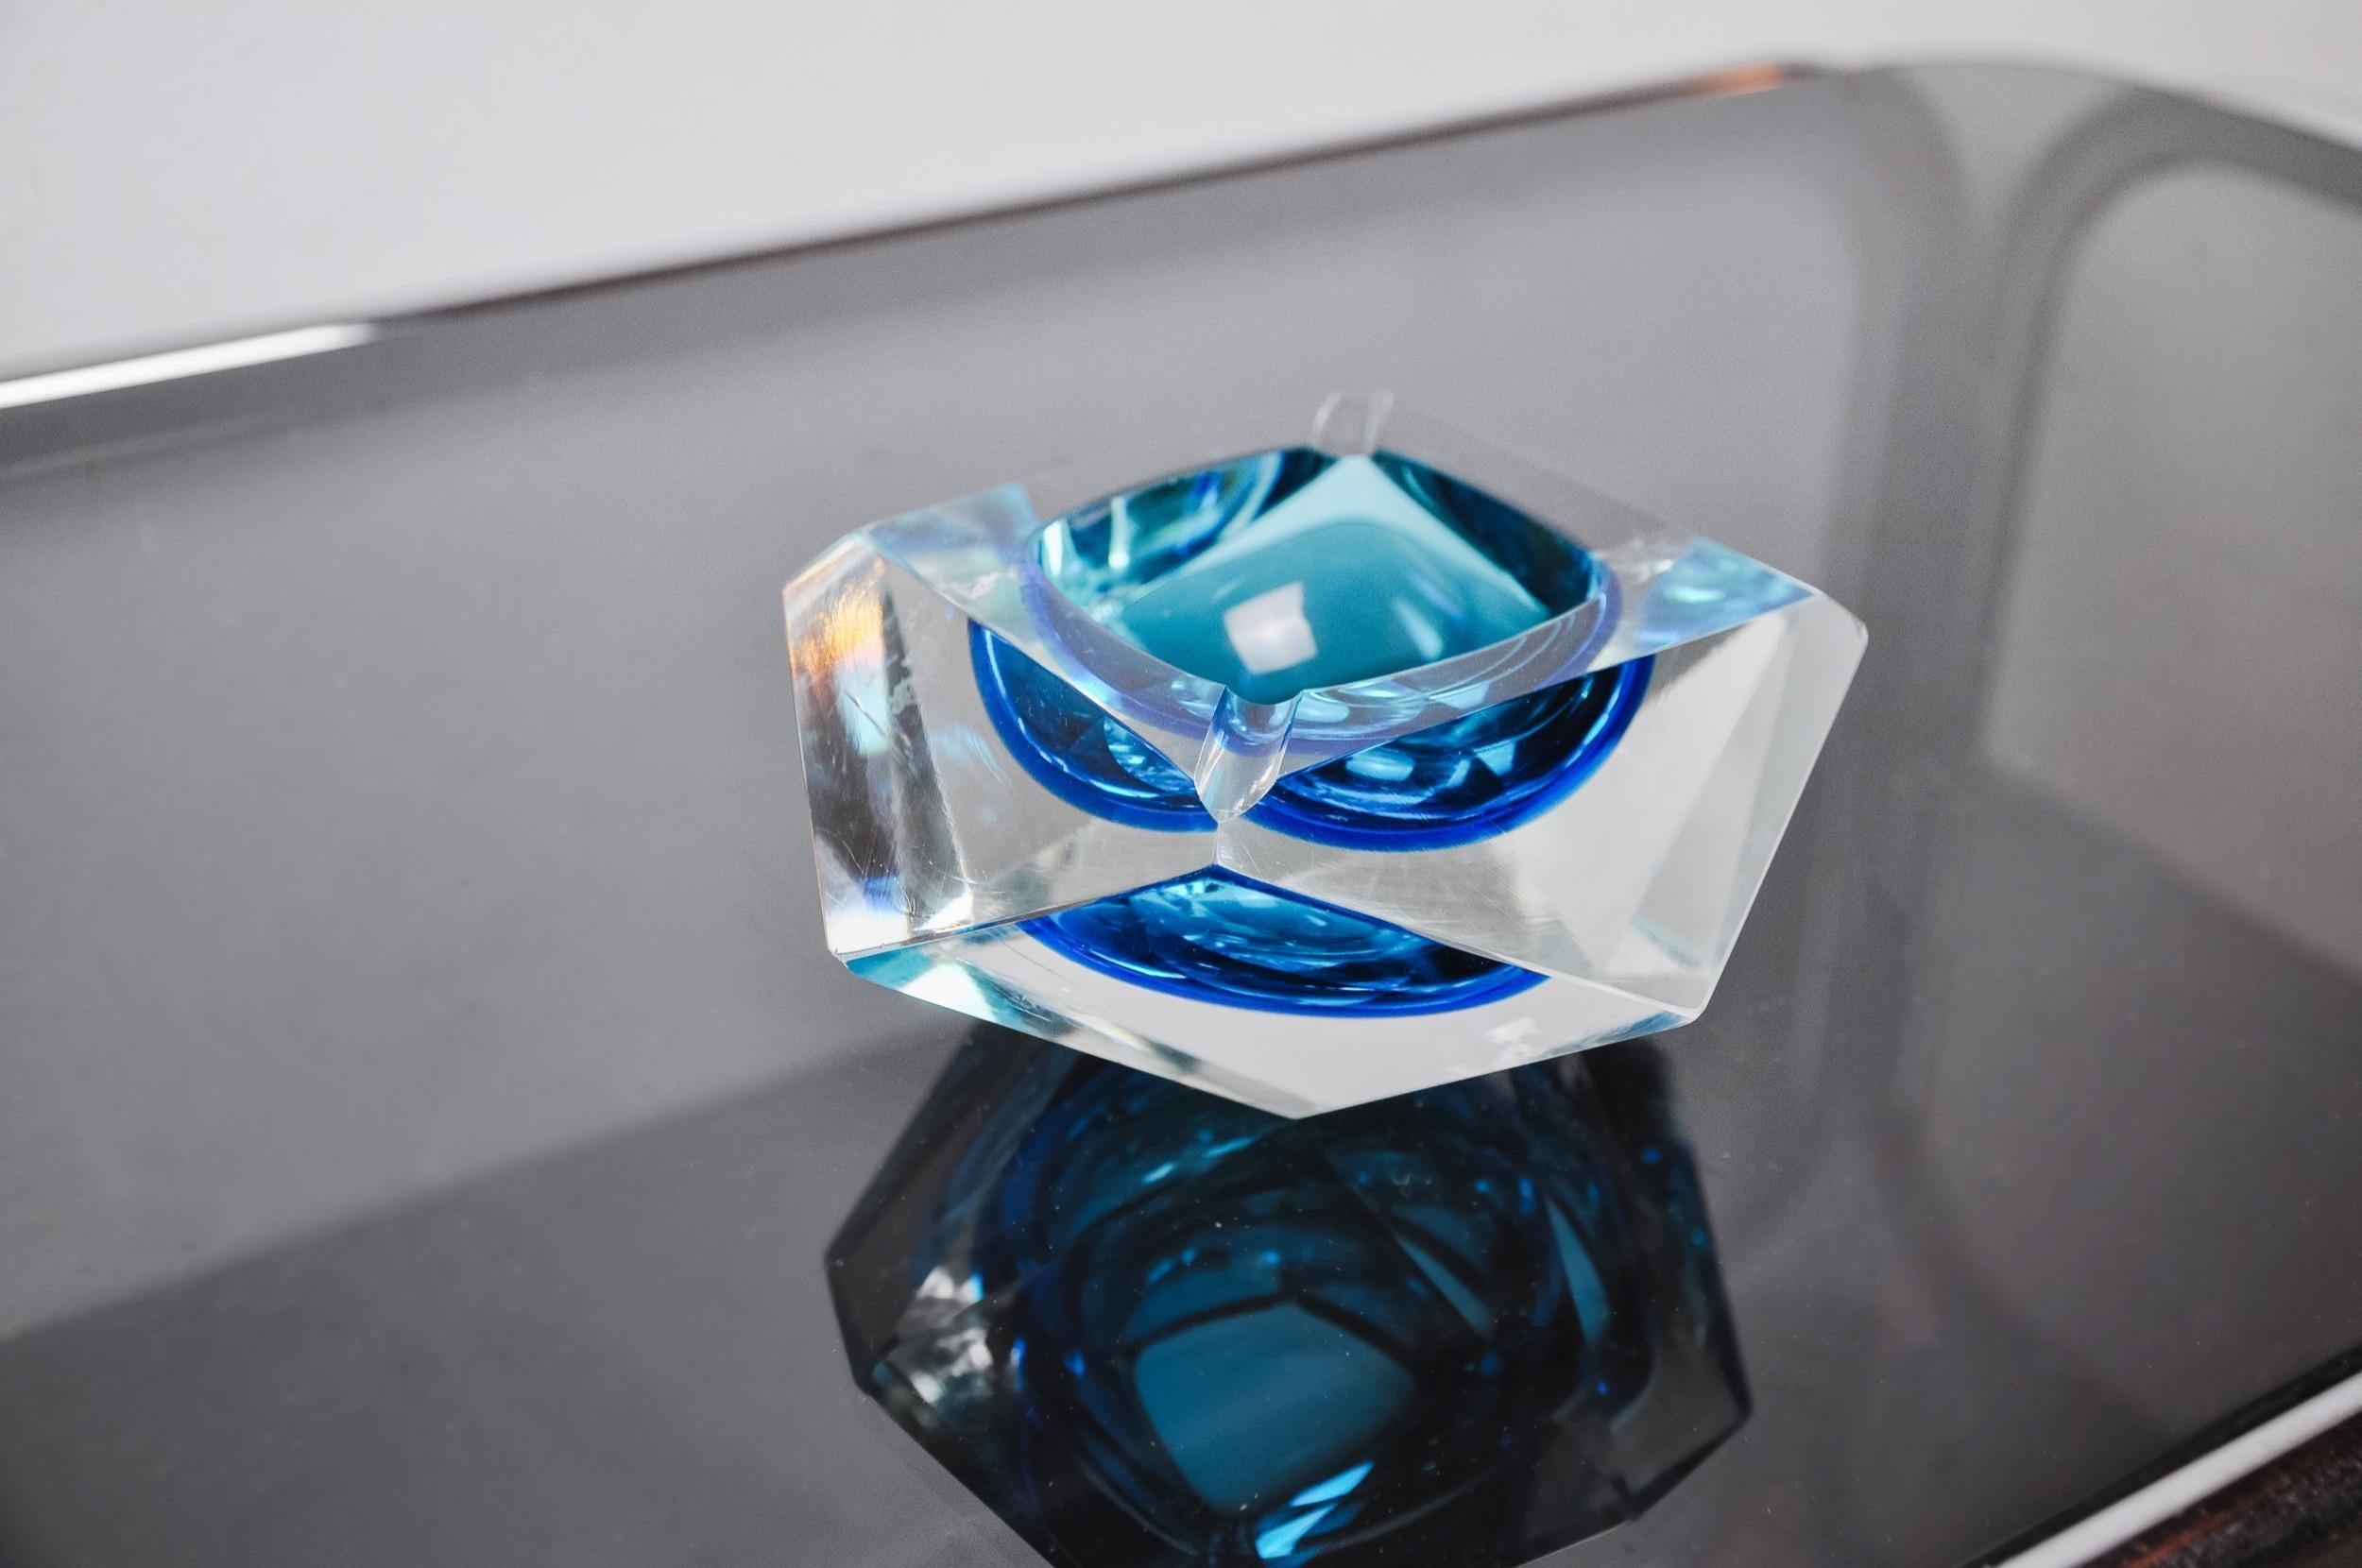 Superb and rare blue sommerso ashtray designed and manufactured for seguso in murano in the 1970s. Handcrafted work of faceted glass using the 